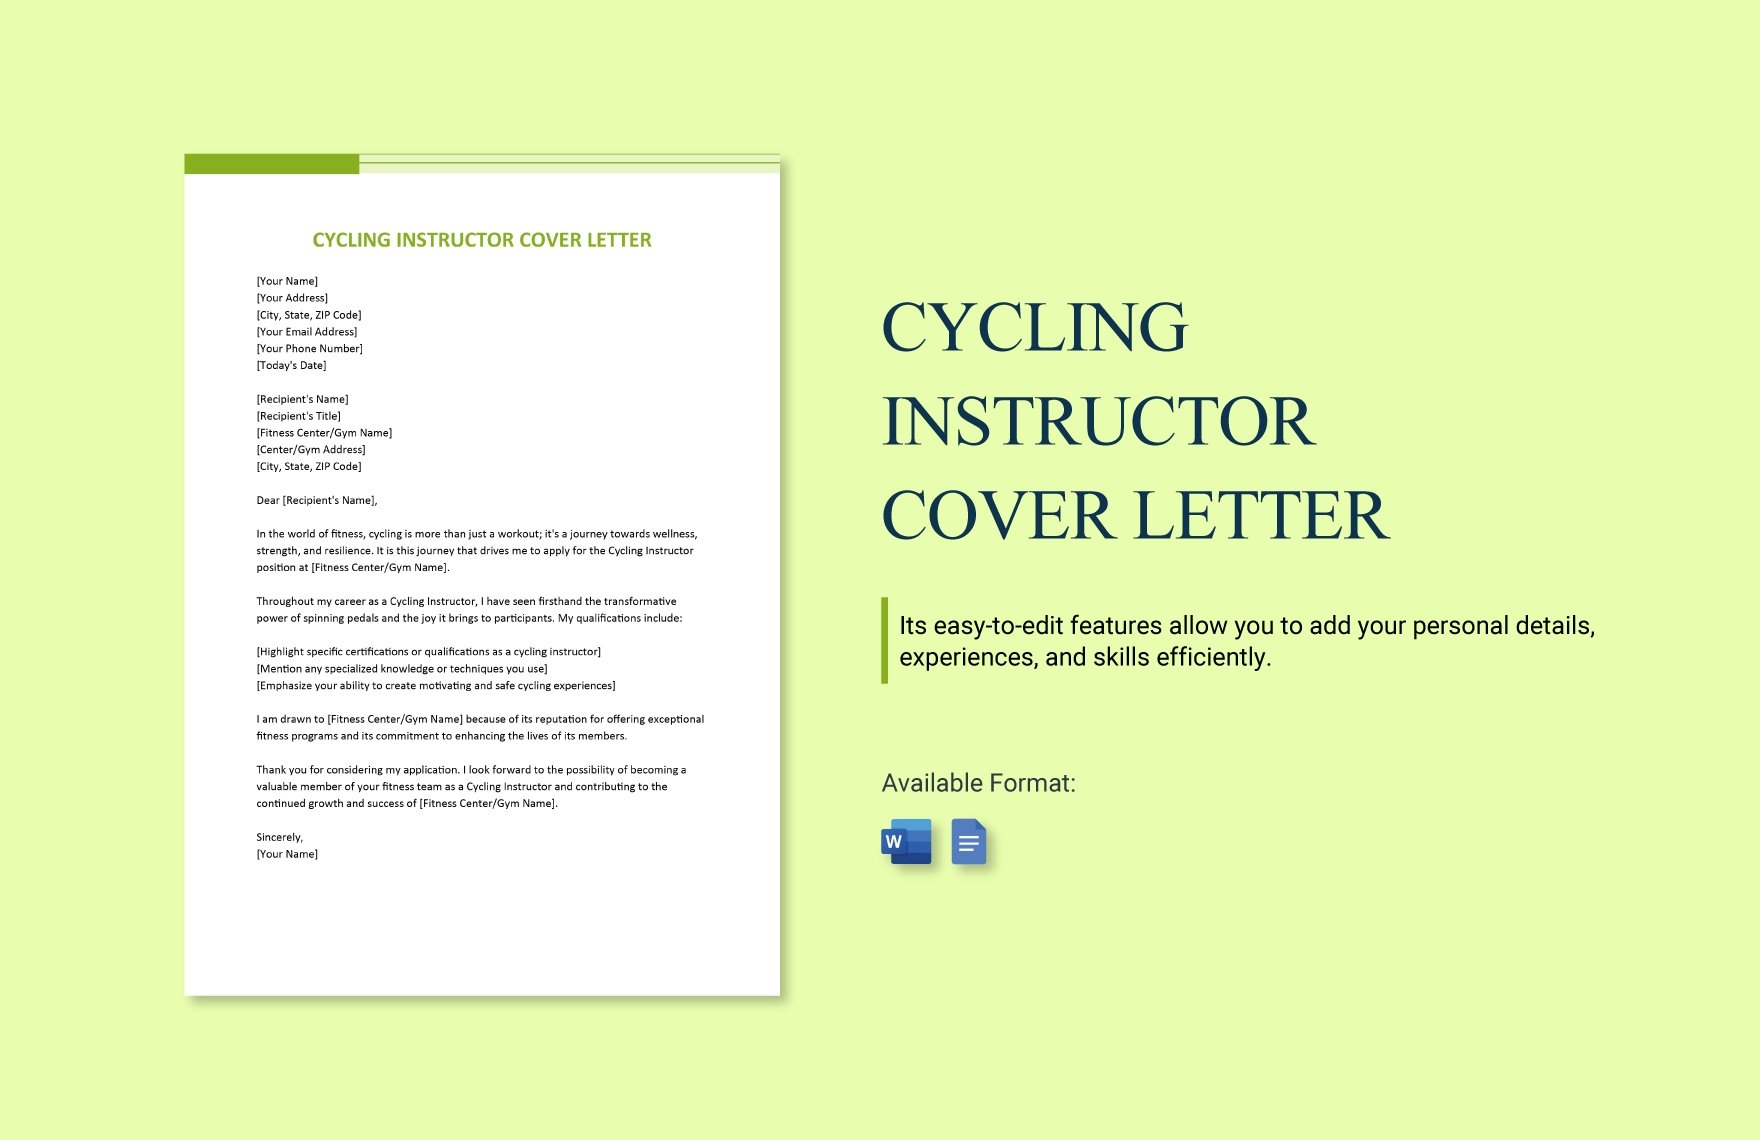 Cycling Instructor Cover Letter in Word, Google Docs